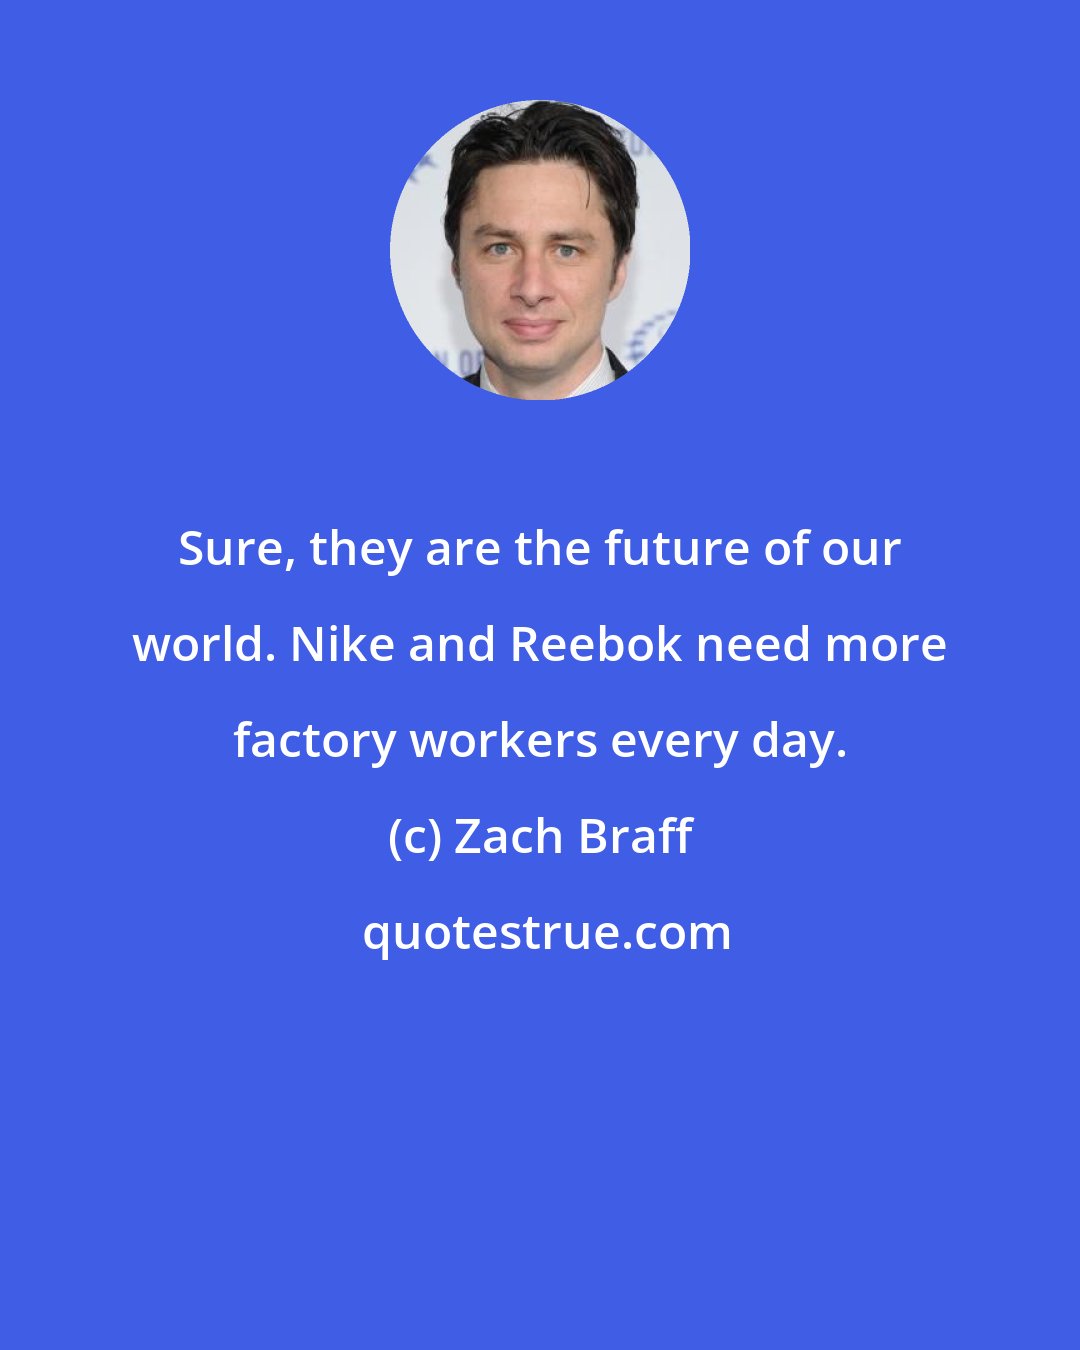 Zach Braff: Sure, they are the future of our world. Nike and Reebok need more factory workers every day.